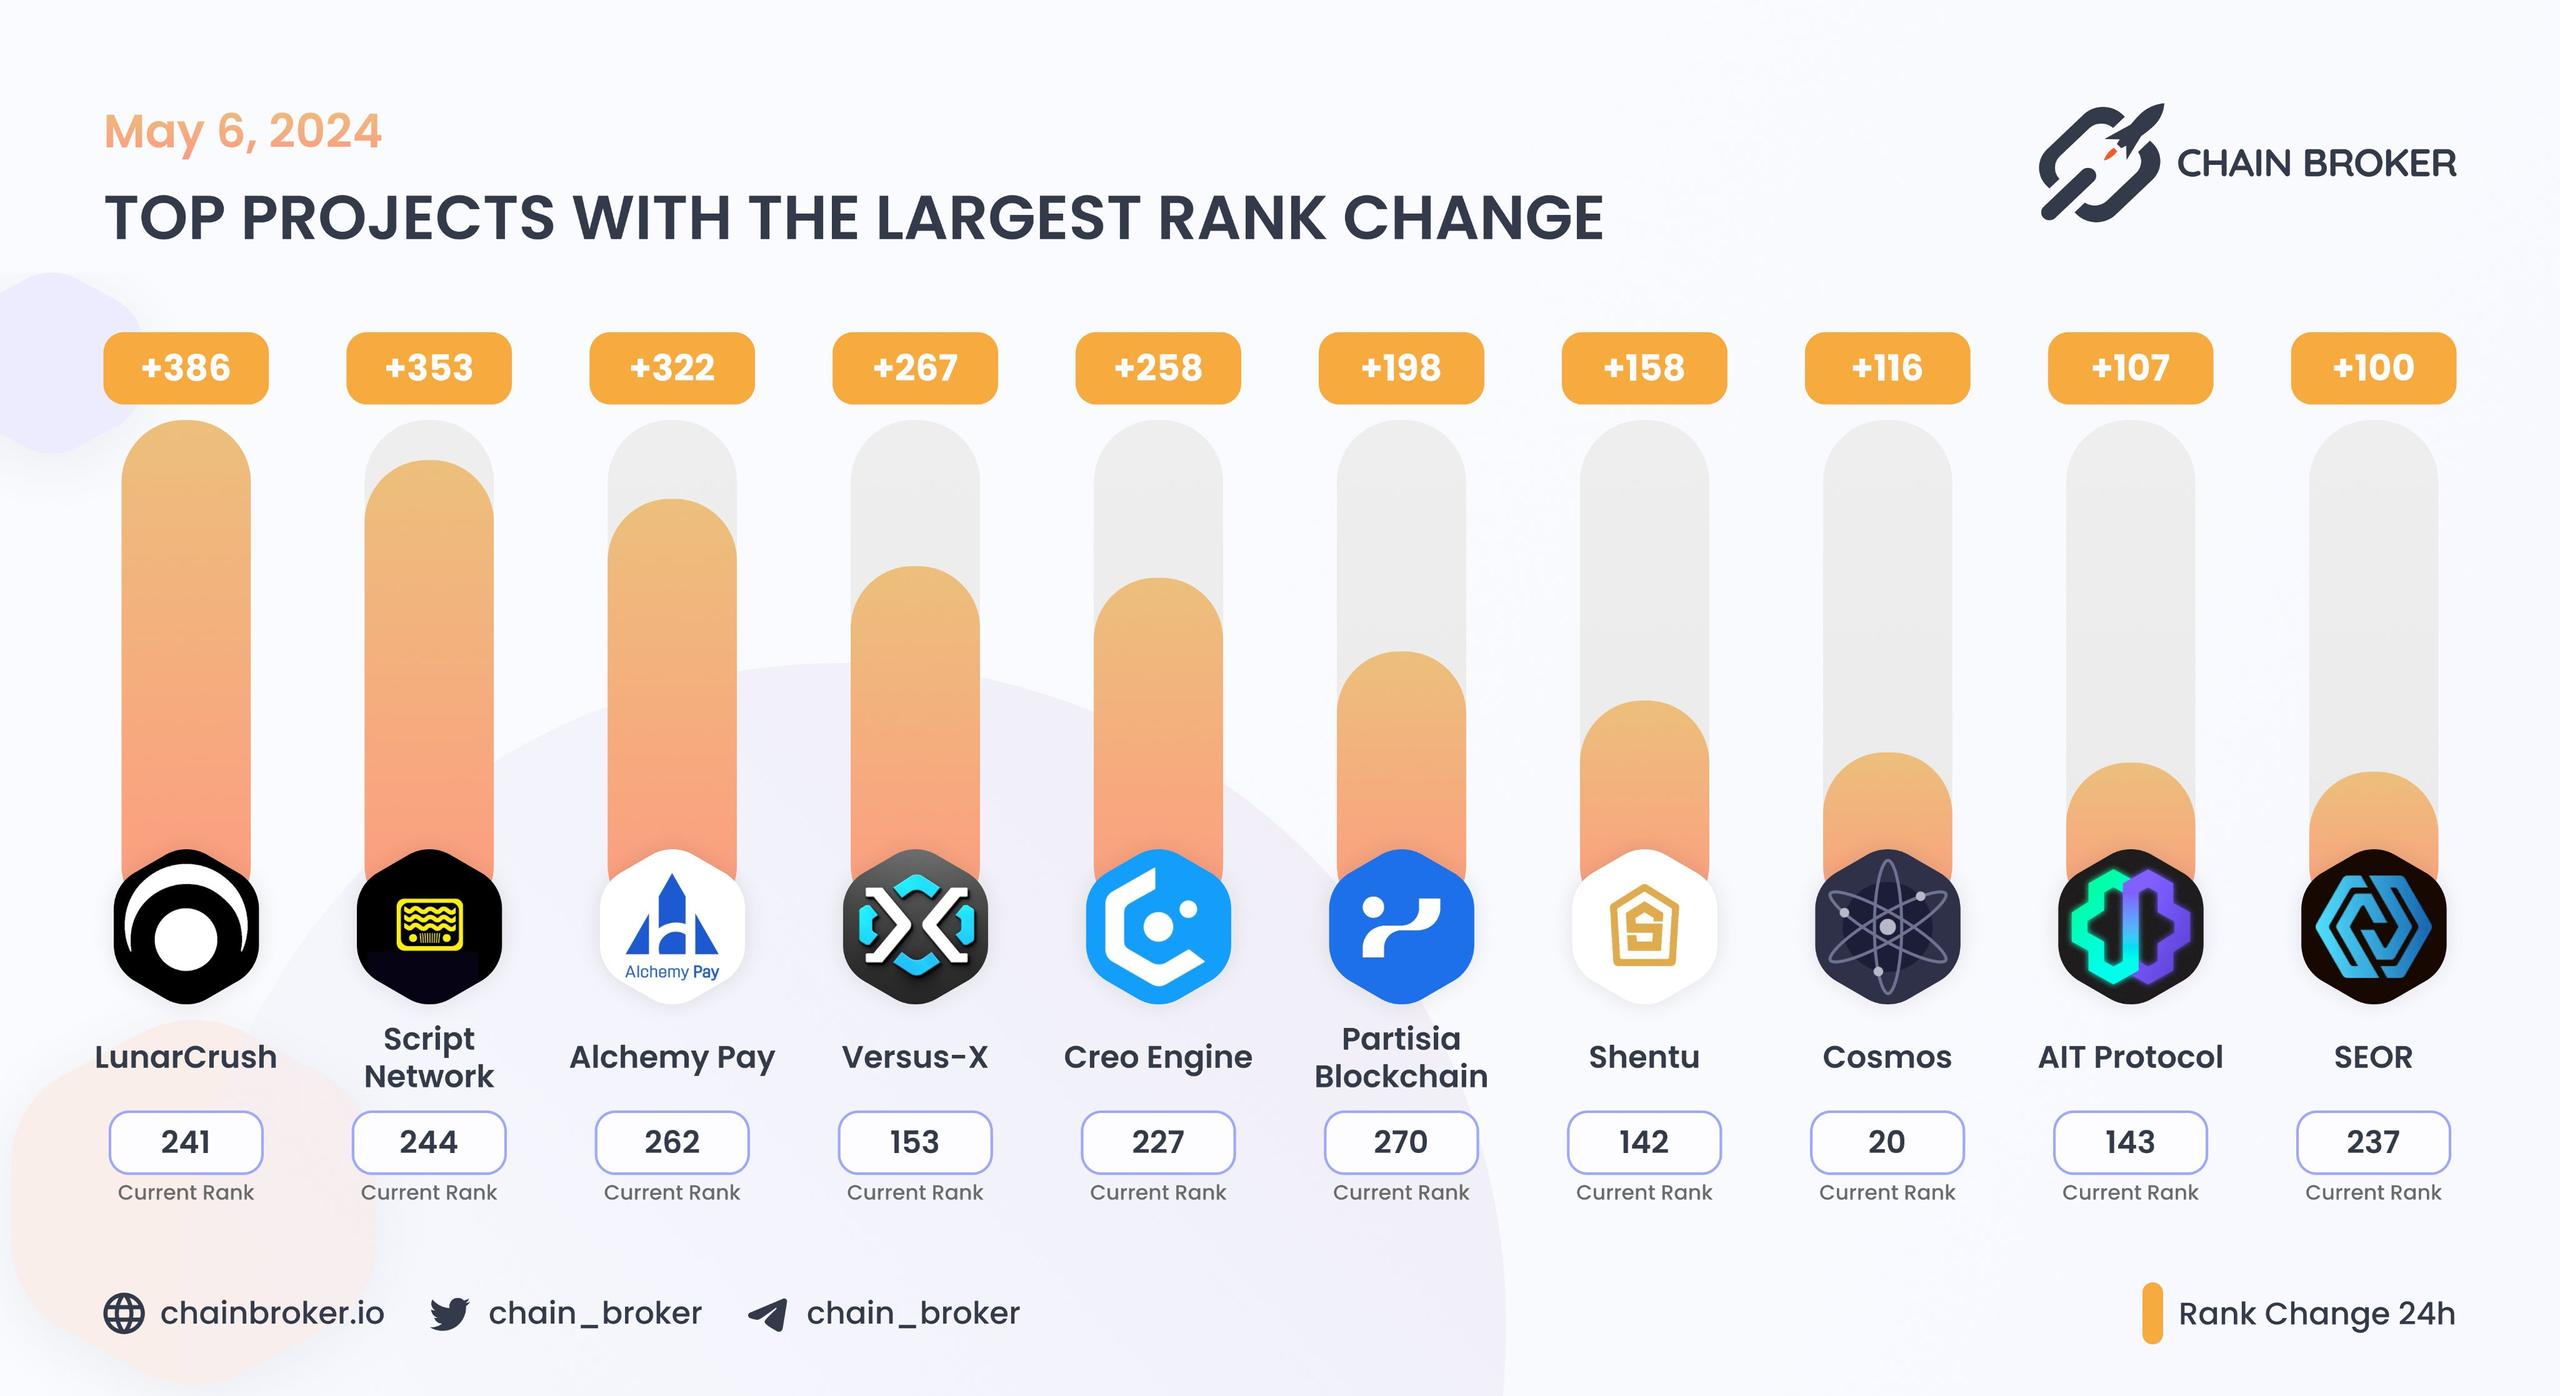 Top projects with the largest rank change